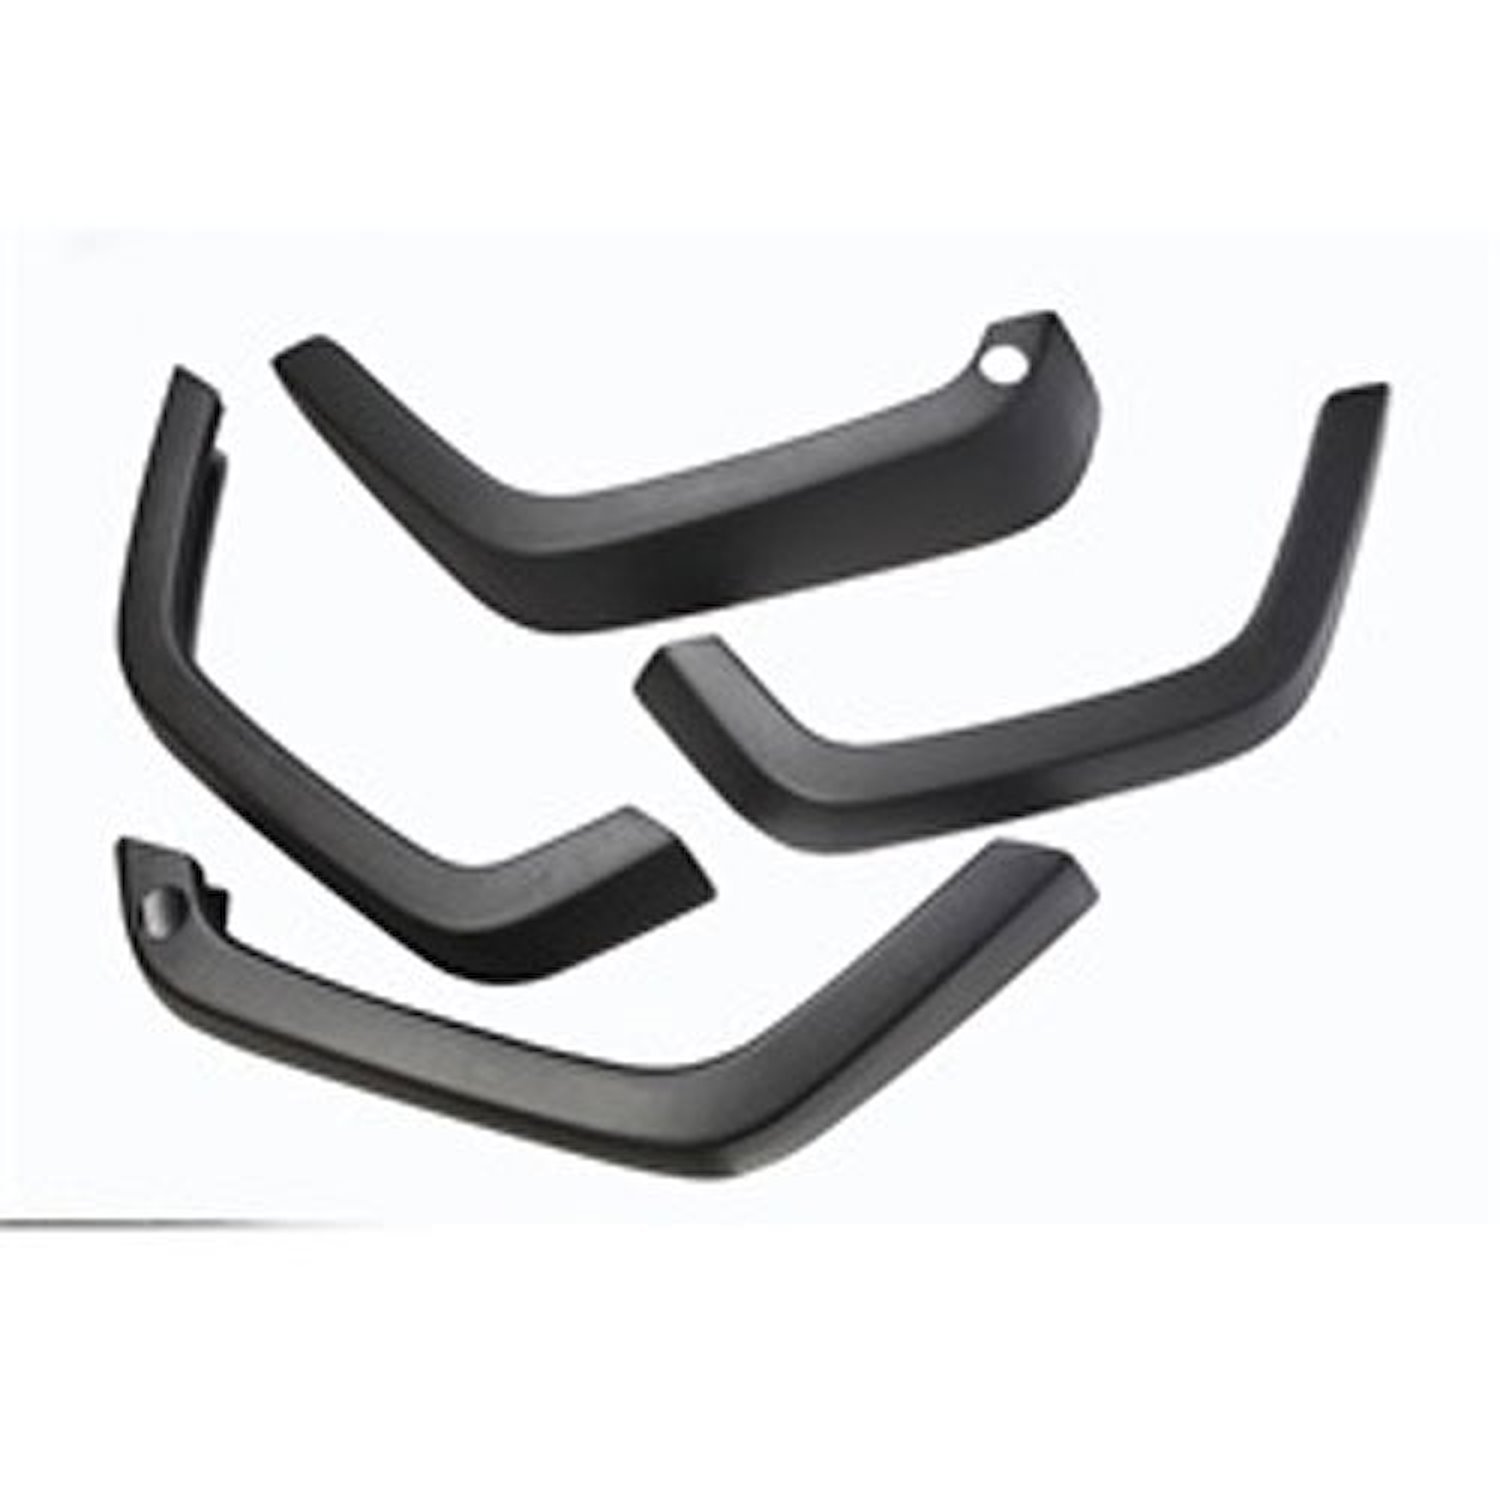 This 4 piece black OE-style fender flare kit